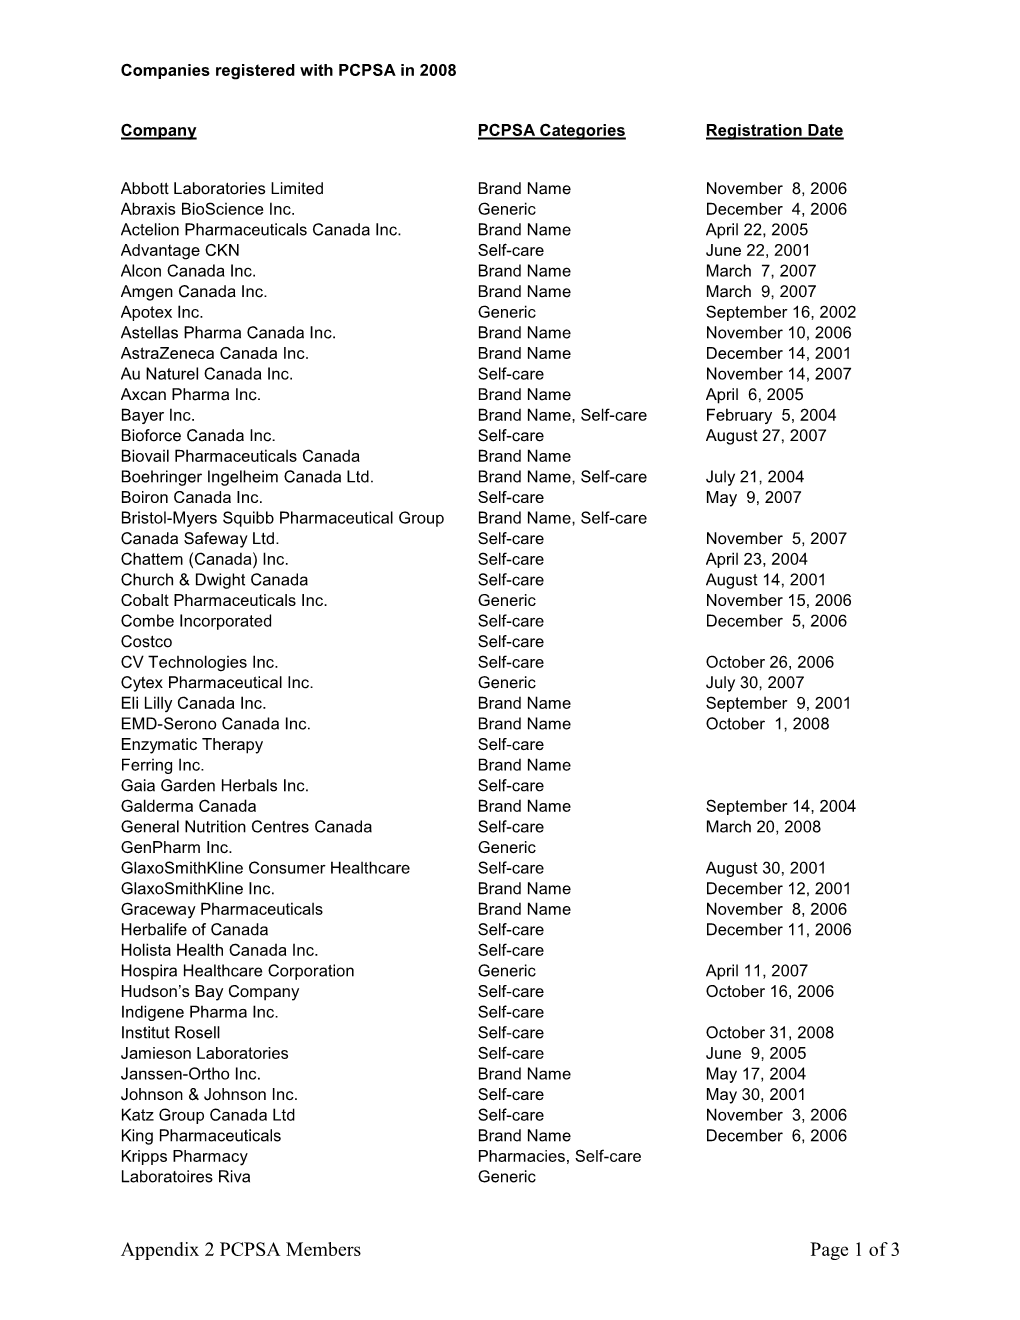 Appendix 2 PCPSA Members Page 1 of 3 Companies Registered with PCPSA in 2008 Page: 2